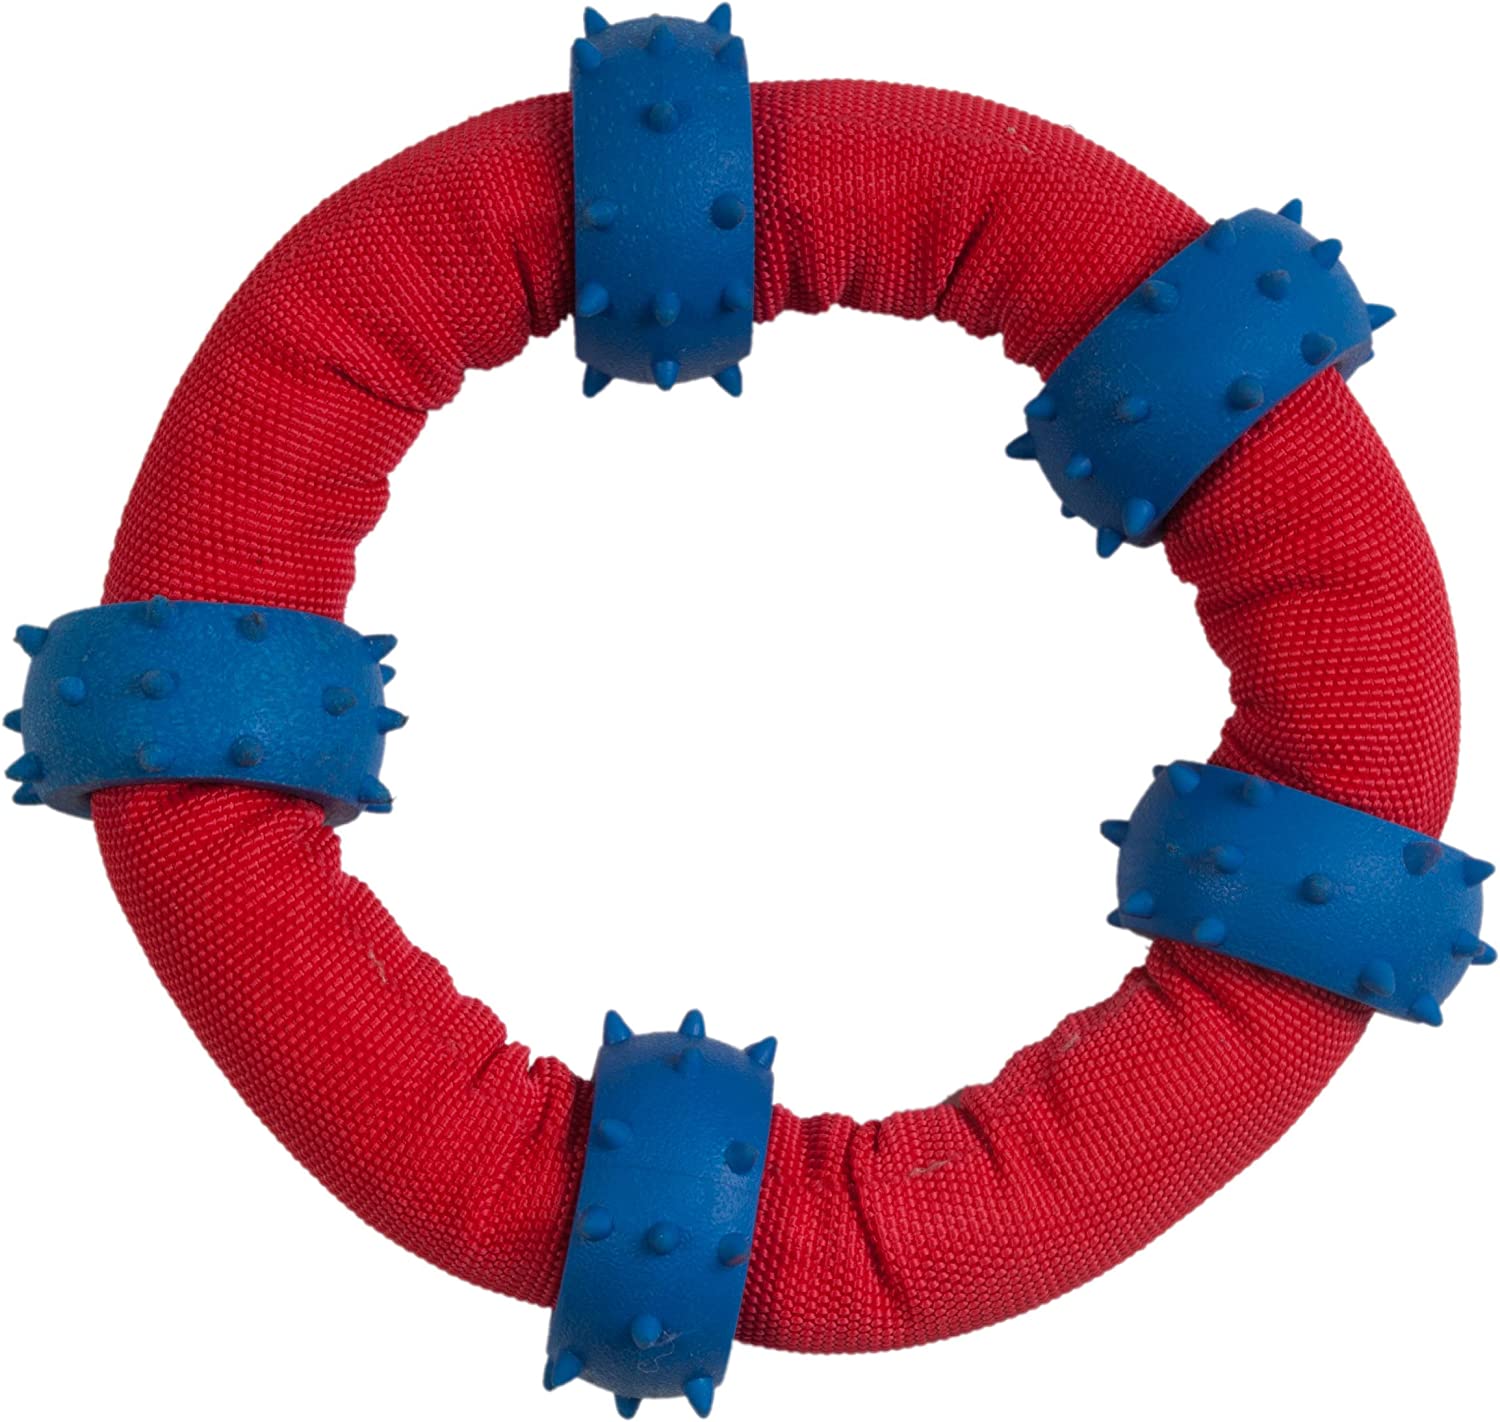 Chomper Gladiator Tuff Nylon Tug with Spike Rings Toy for Dogs